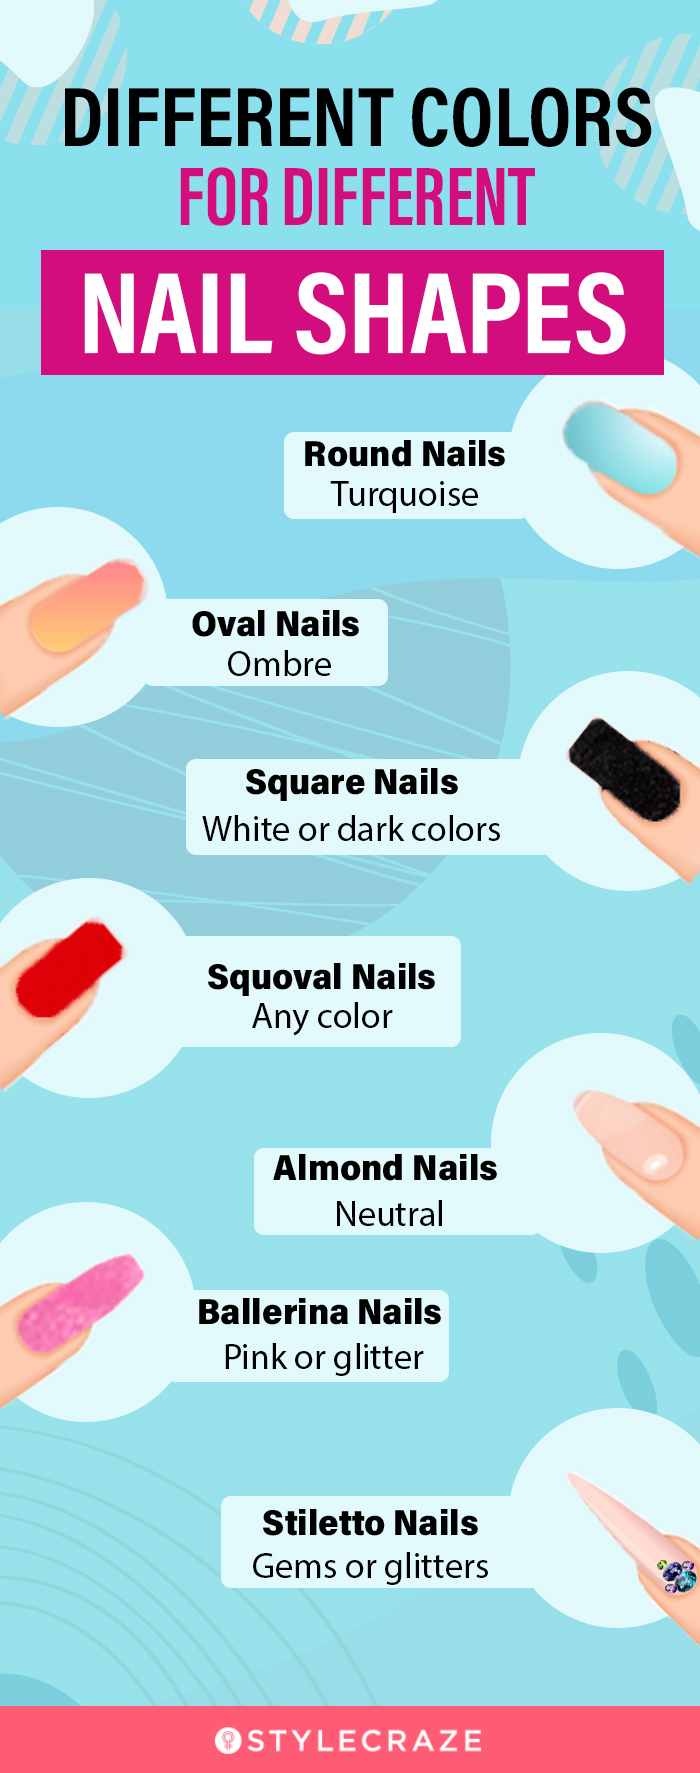 What would happen if I didn't cut my nails for 20 years? - Quora